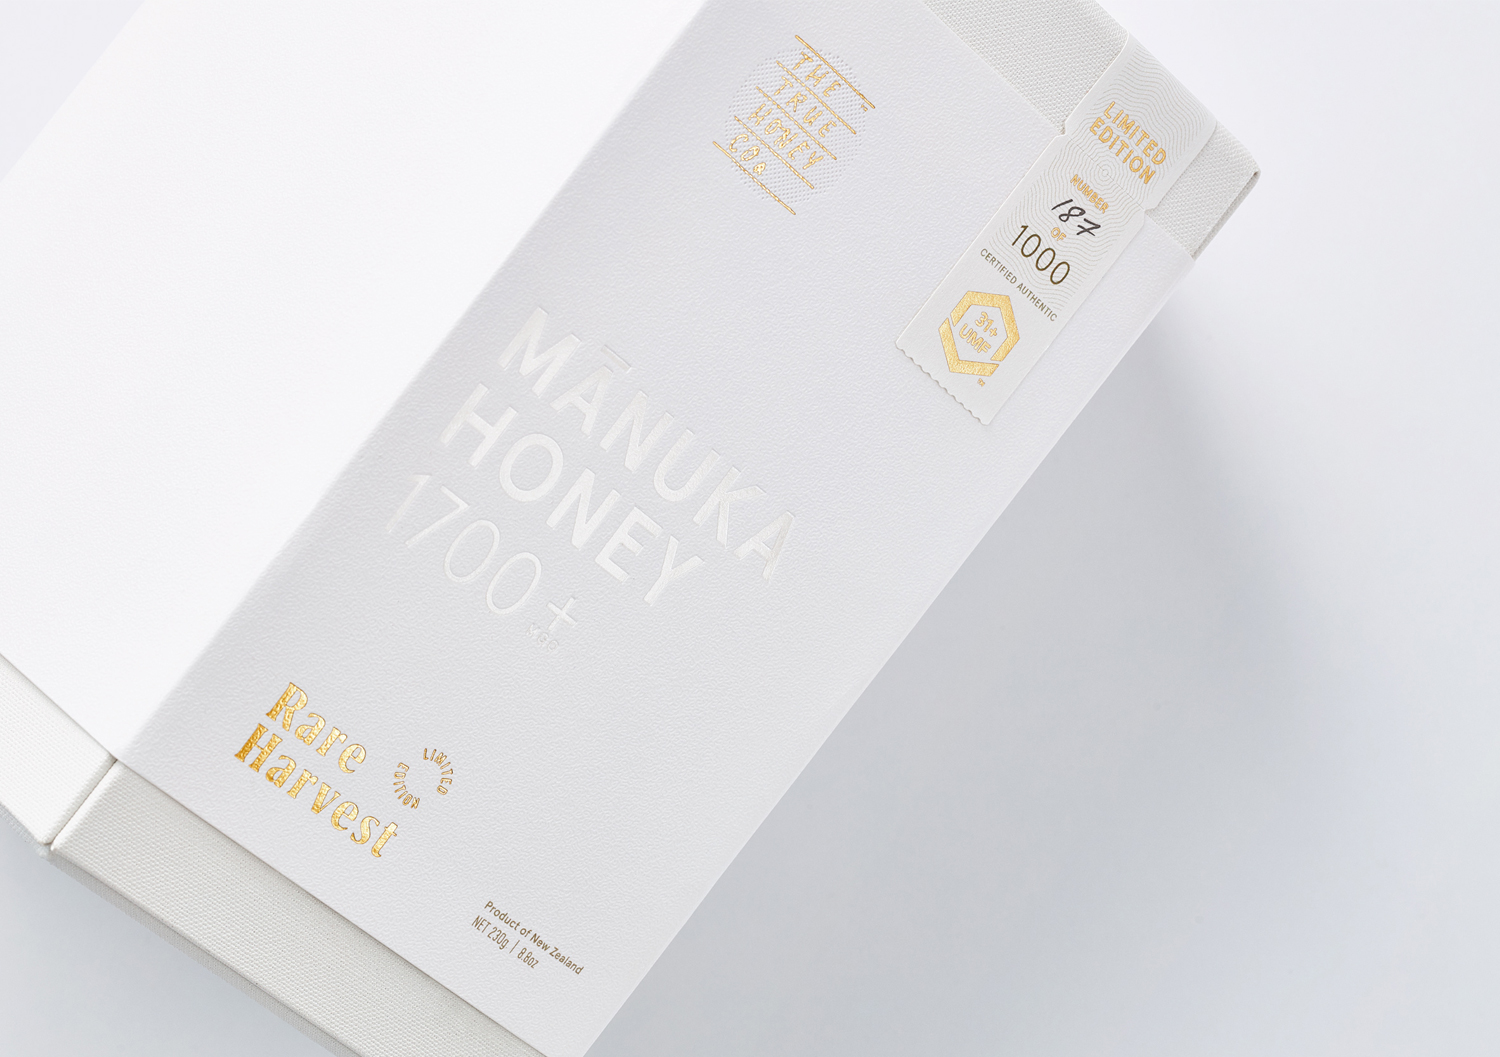 The True Honey Co. Rare Harvest Brand and Packaging Designed by Marx Design